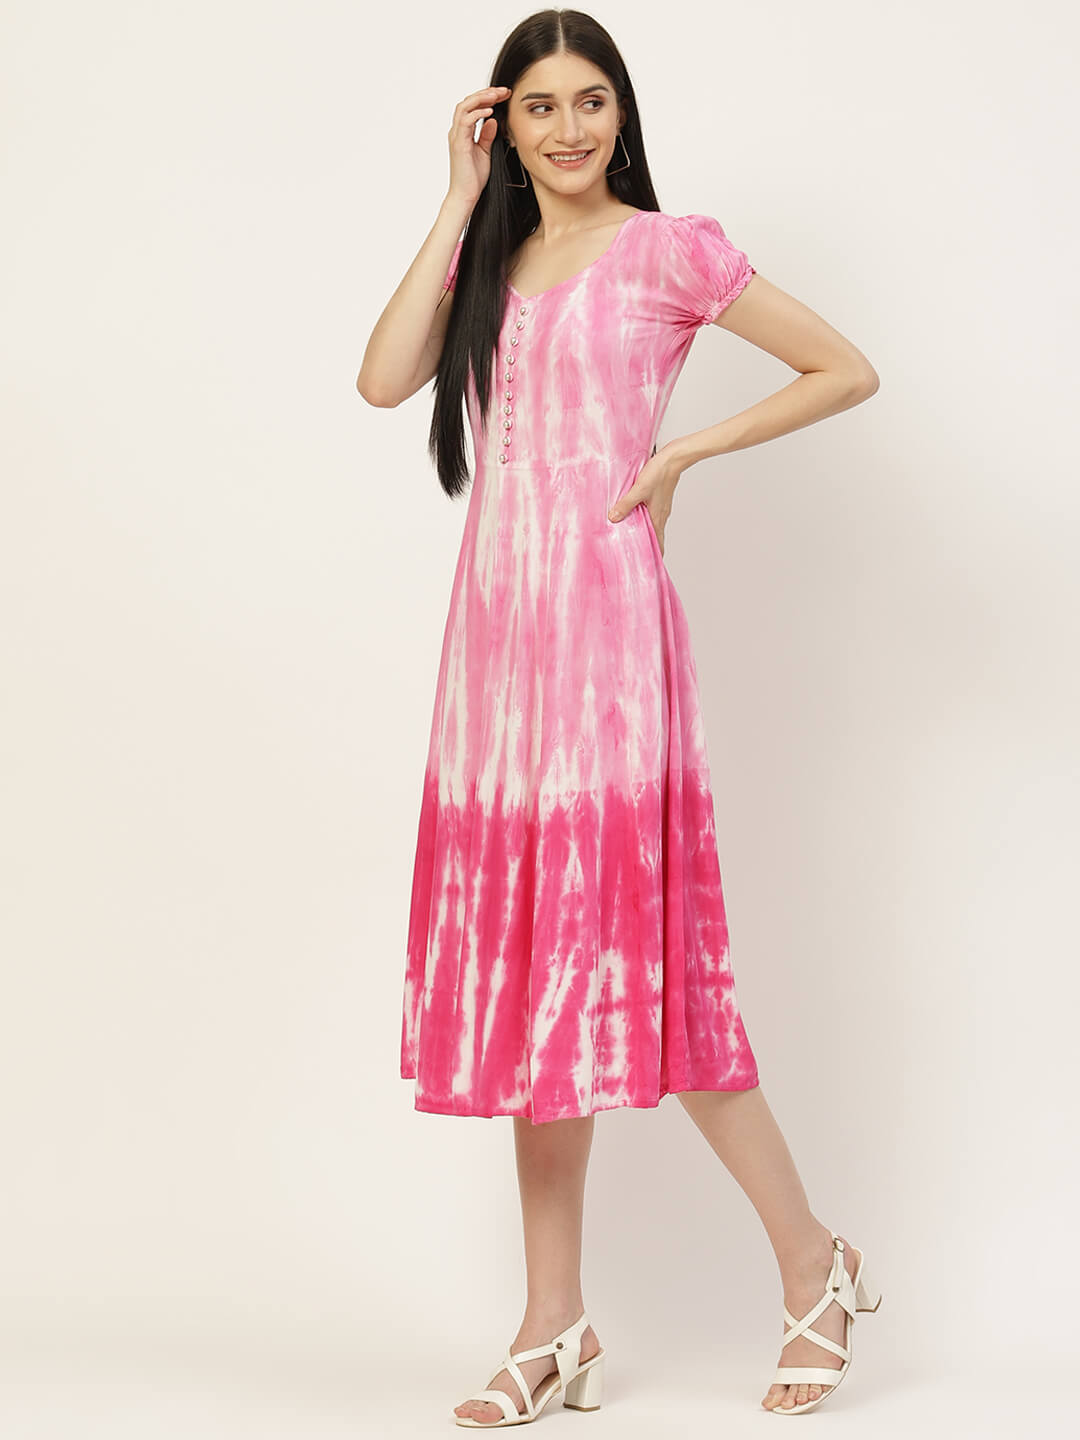 White And Pink Tie And Dye Dress